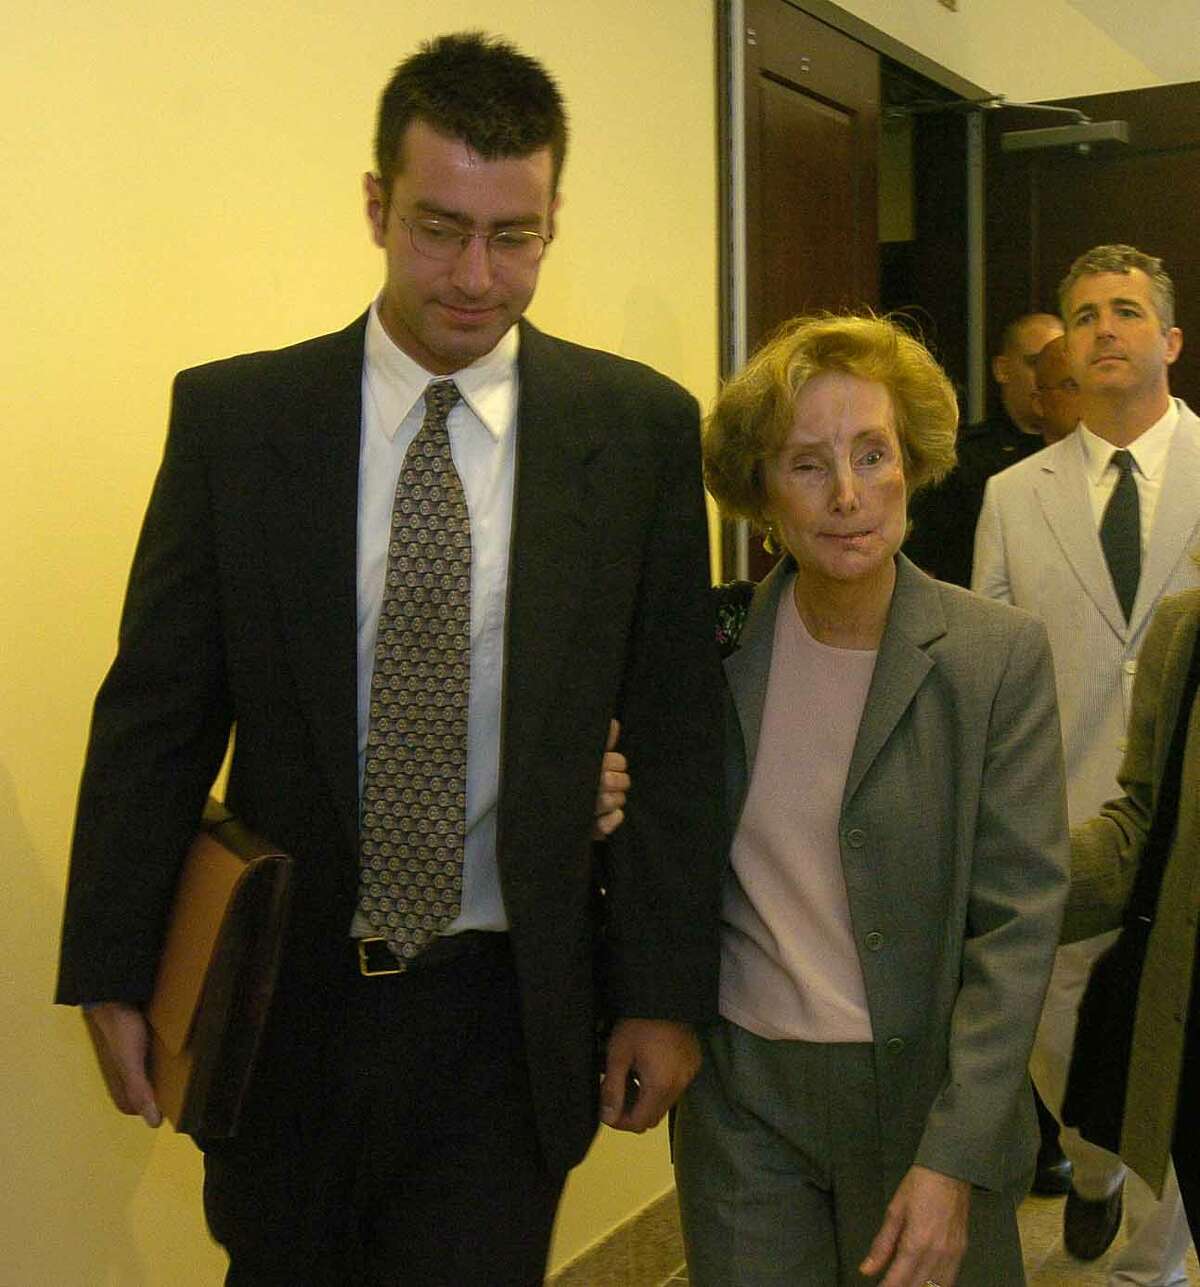 Times Union staff photo by Paul Buckowski --- Christopher Porco, left, and his mother, Joan Porco, right, leave Albany County court in Albany, N.Y. on Tuesday, May 16, 2006 during a break in pretrial hearings. Christopher is charged in the death of his father, Peter Porco and the attack of his mother back November of 2004.